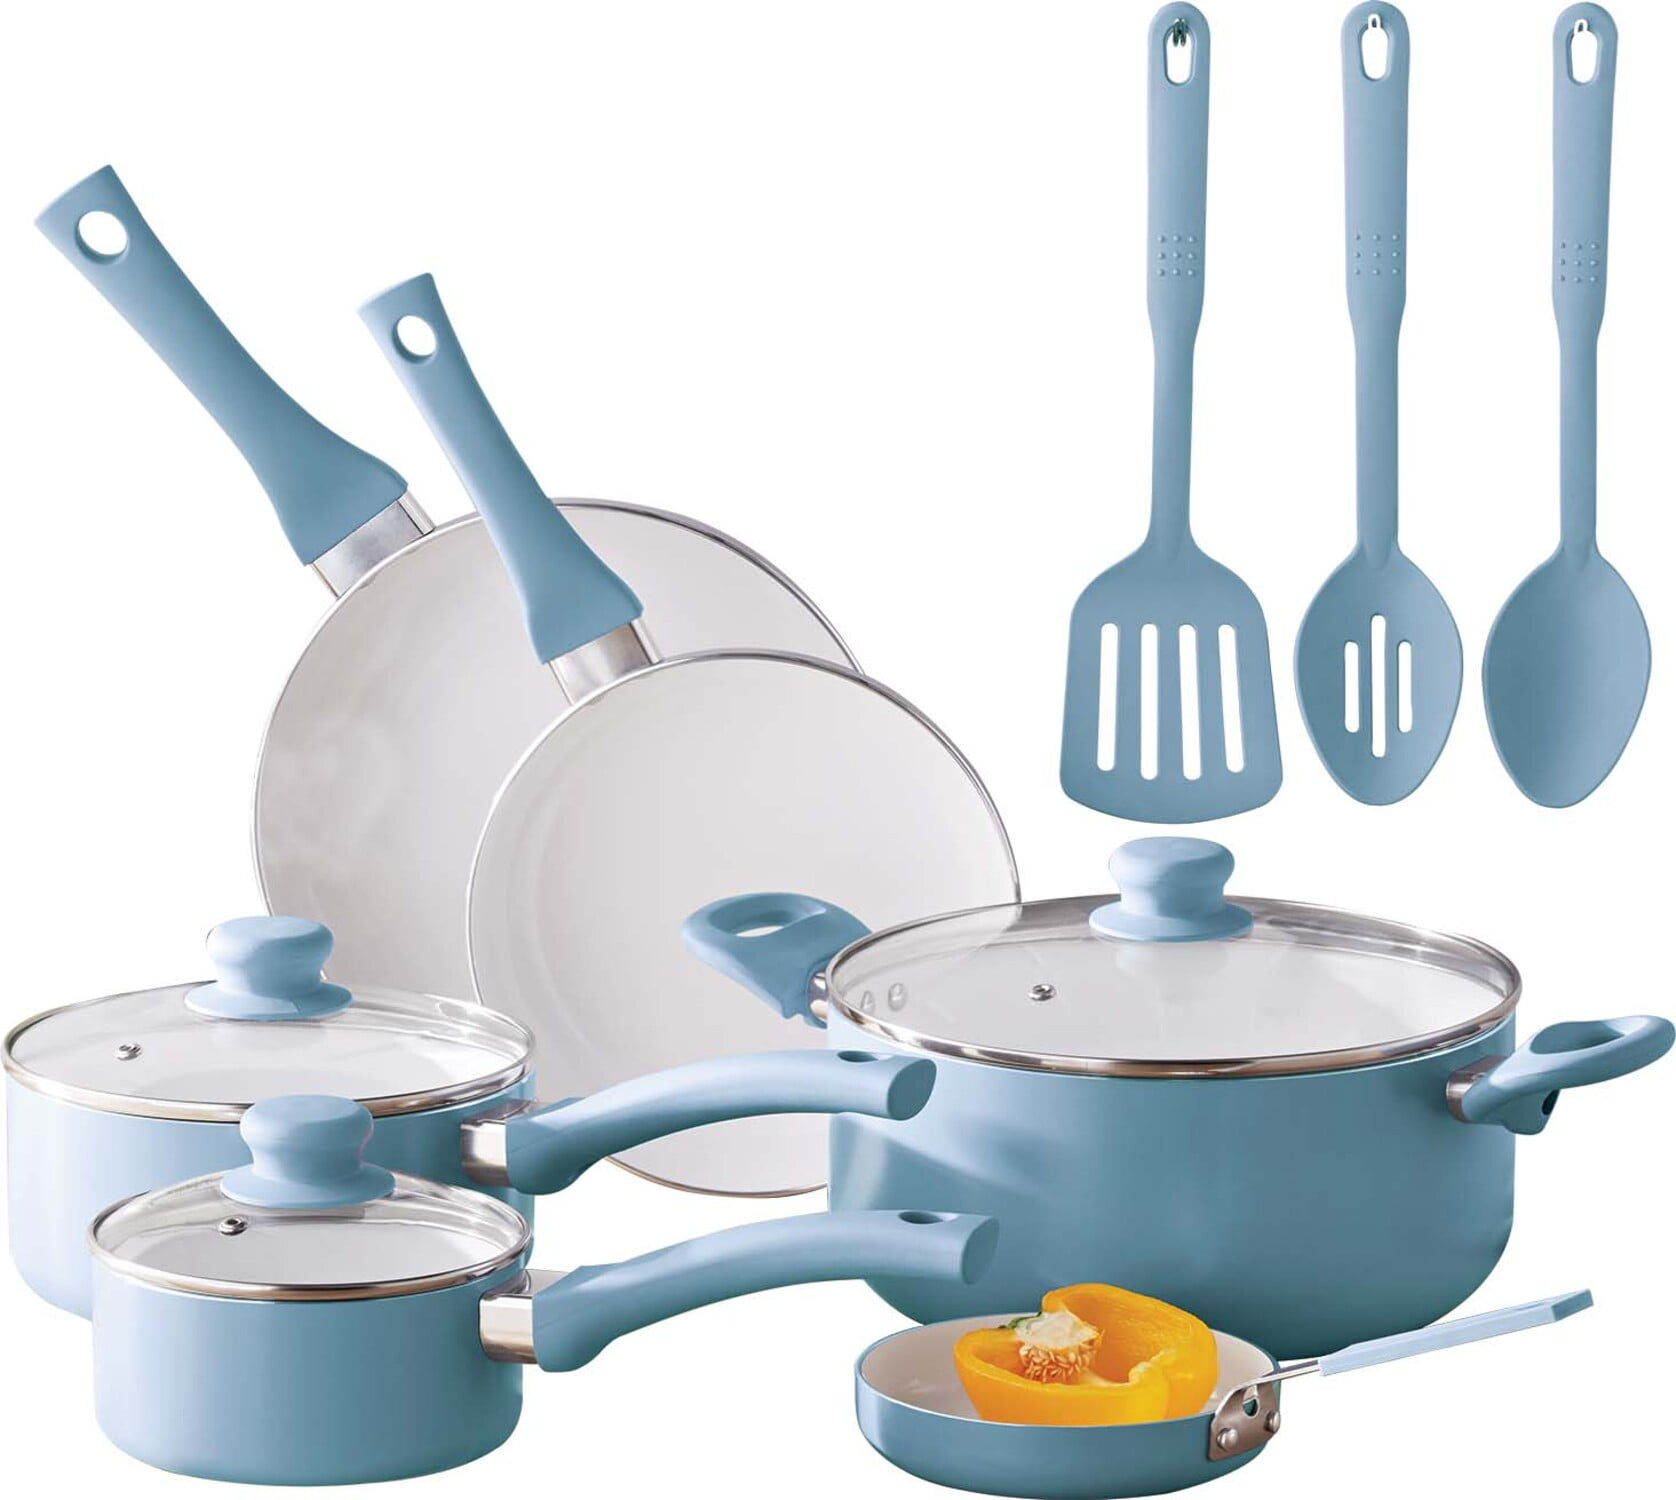 Multipurpose Cookware Set | Full-Size and Mini Always Pan and Perfect Pot Set in Blue Salt | 36 Pieces of Cookware in 4 | Toxin-Free Ceramic Coating 